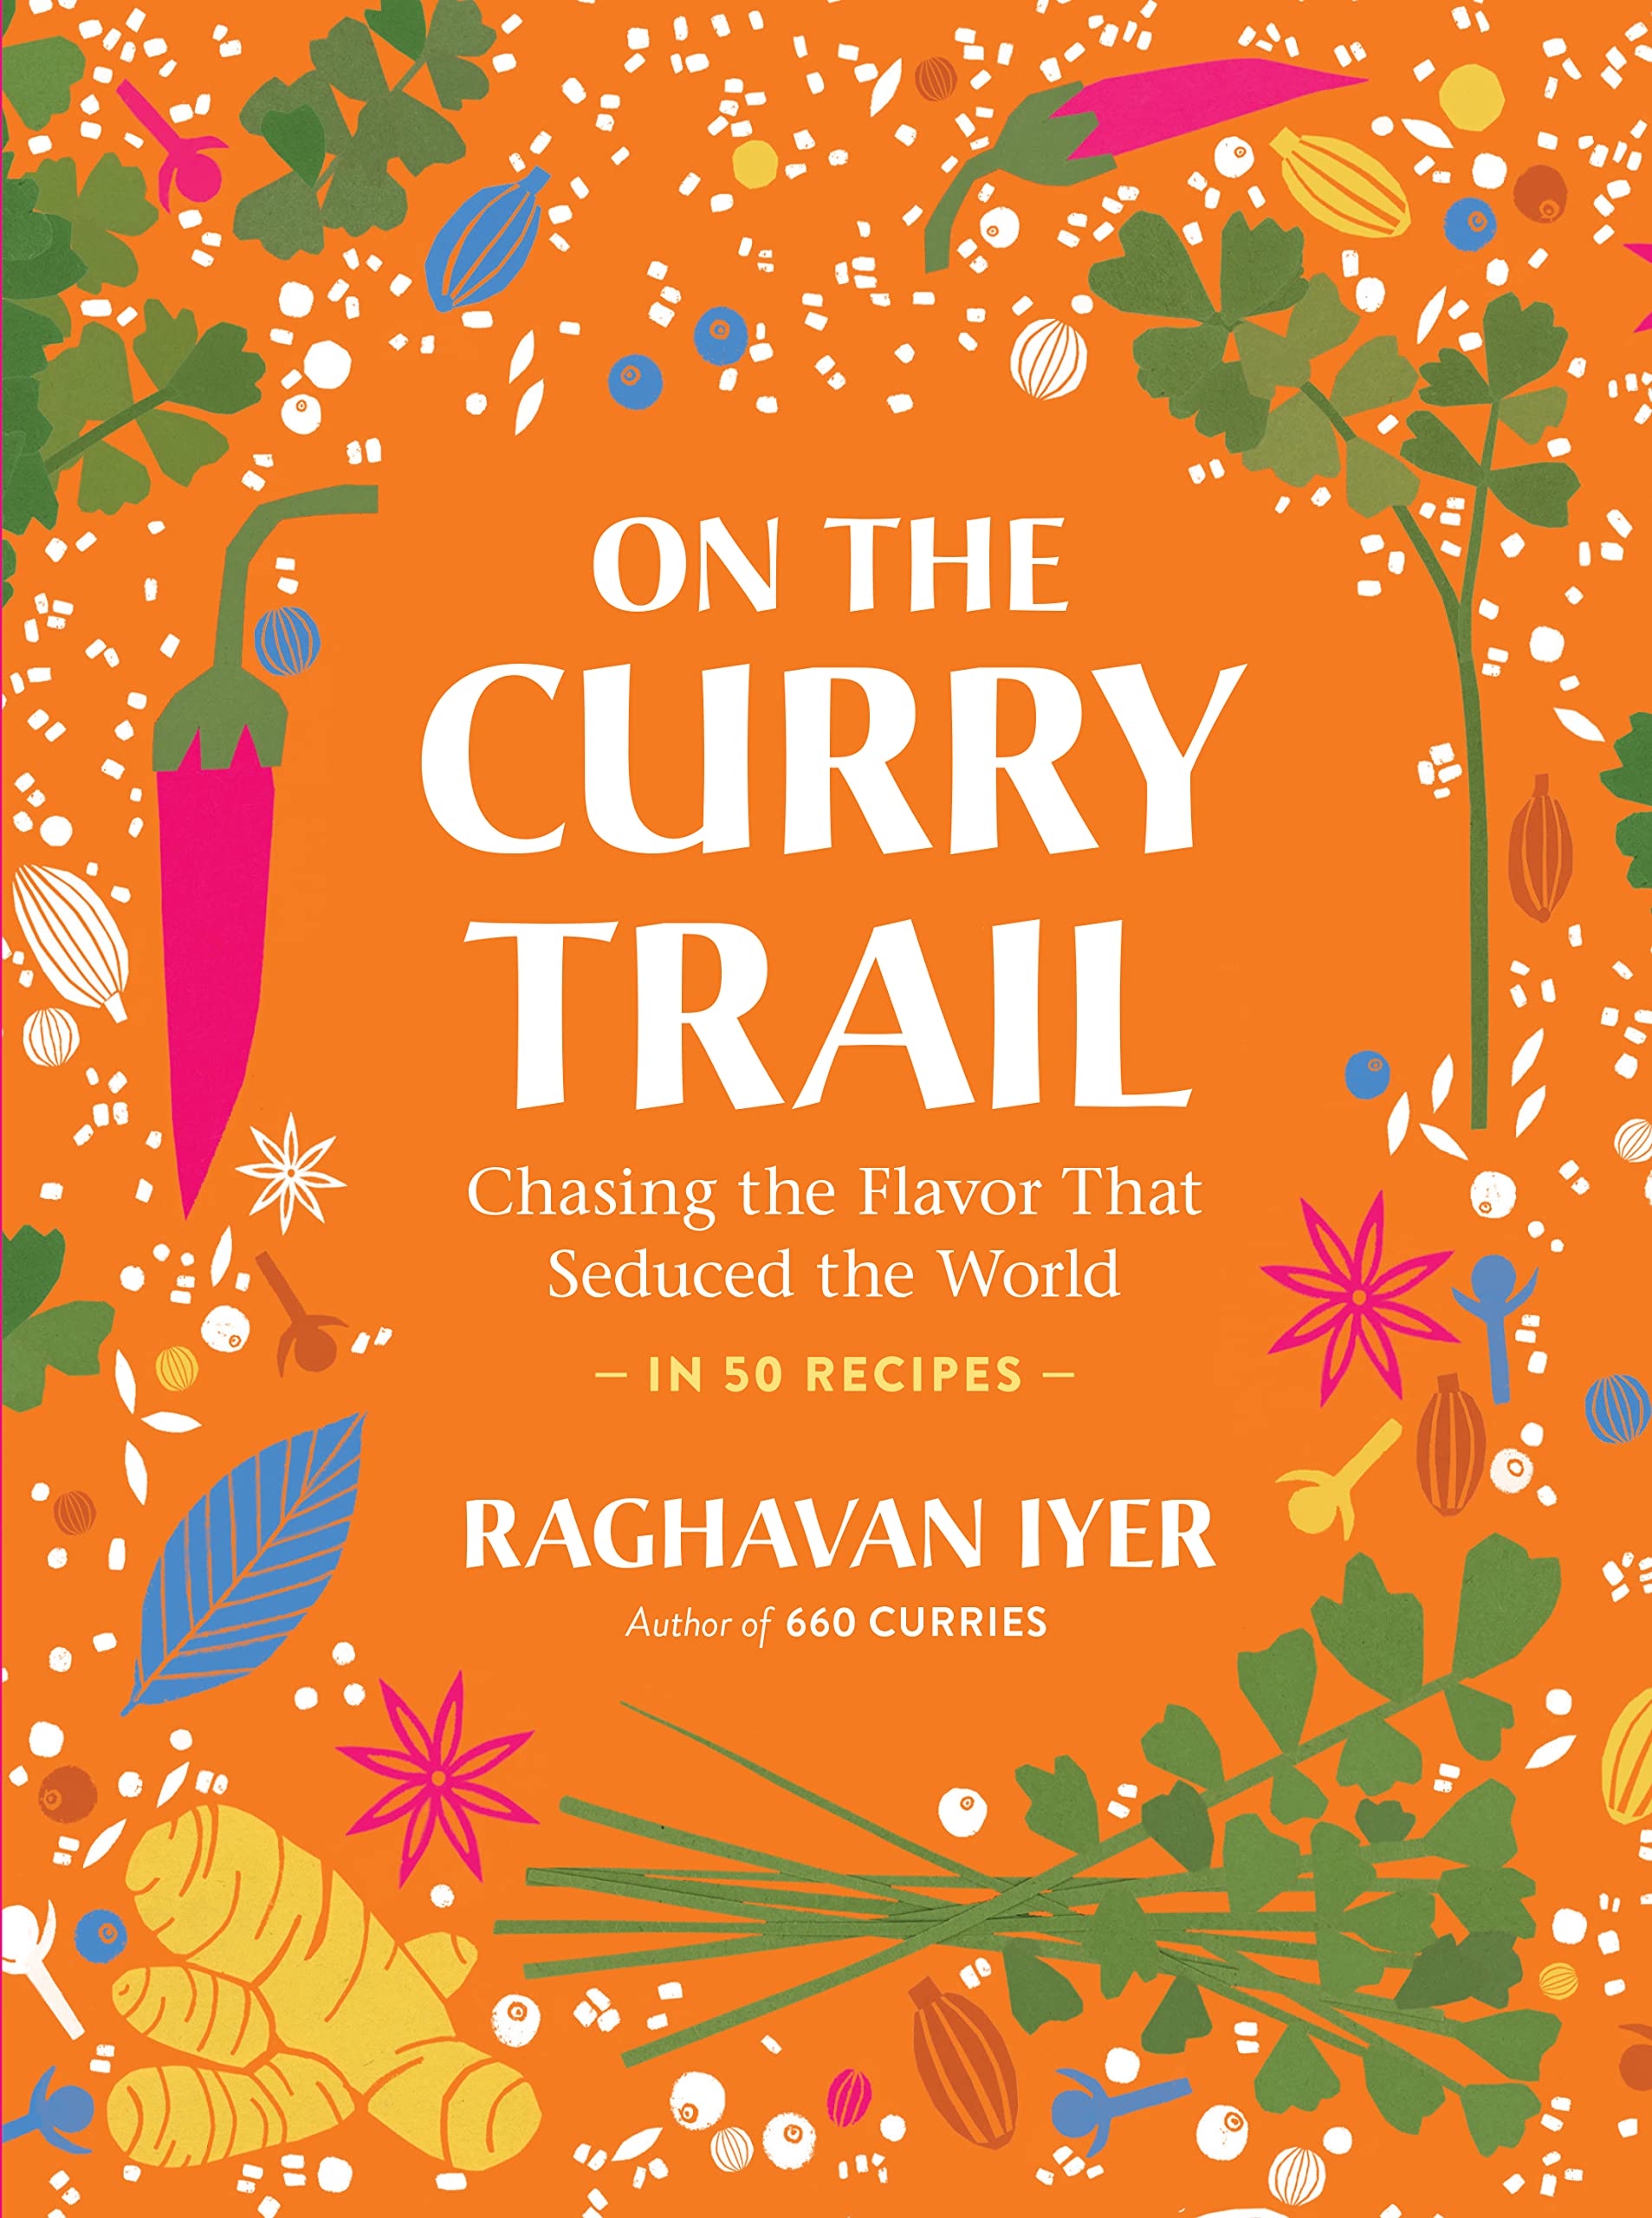 On the Curry Trail: Chasing the Flavor That Seduced the World (Raghavan Iyer)